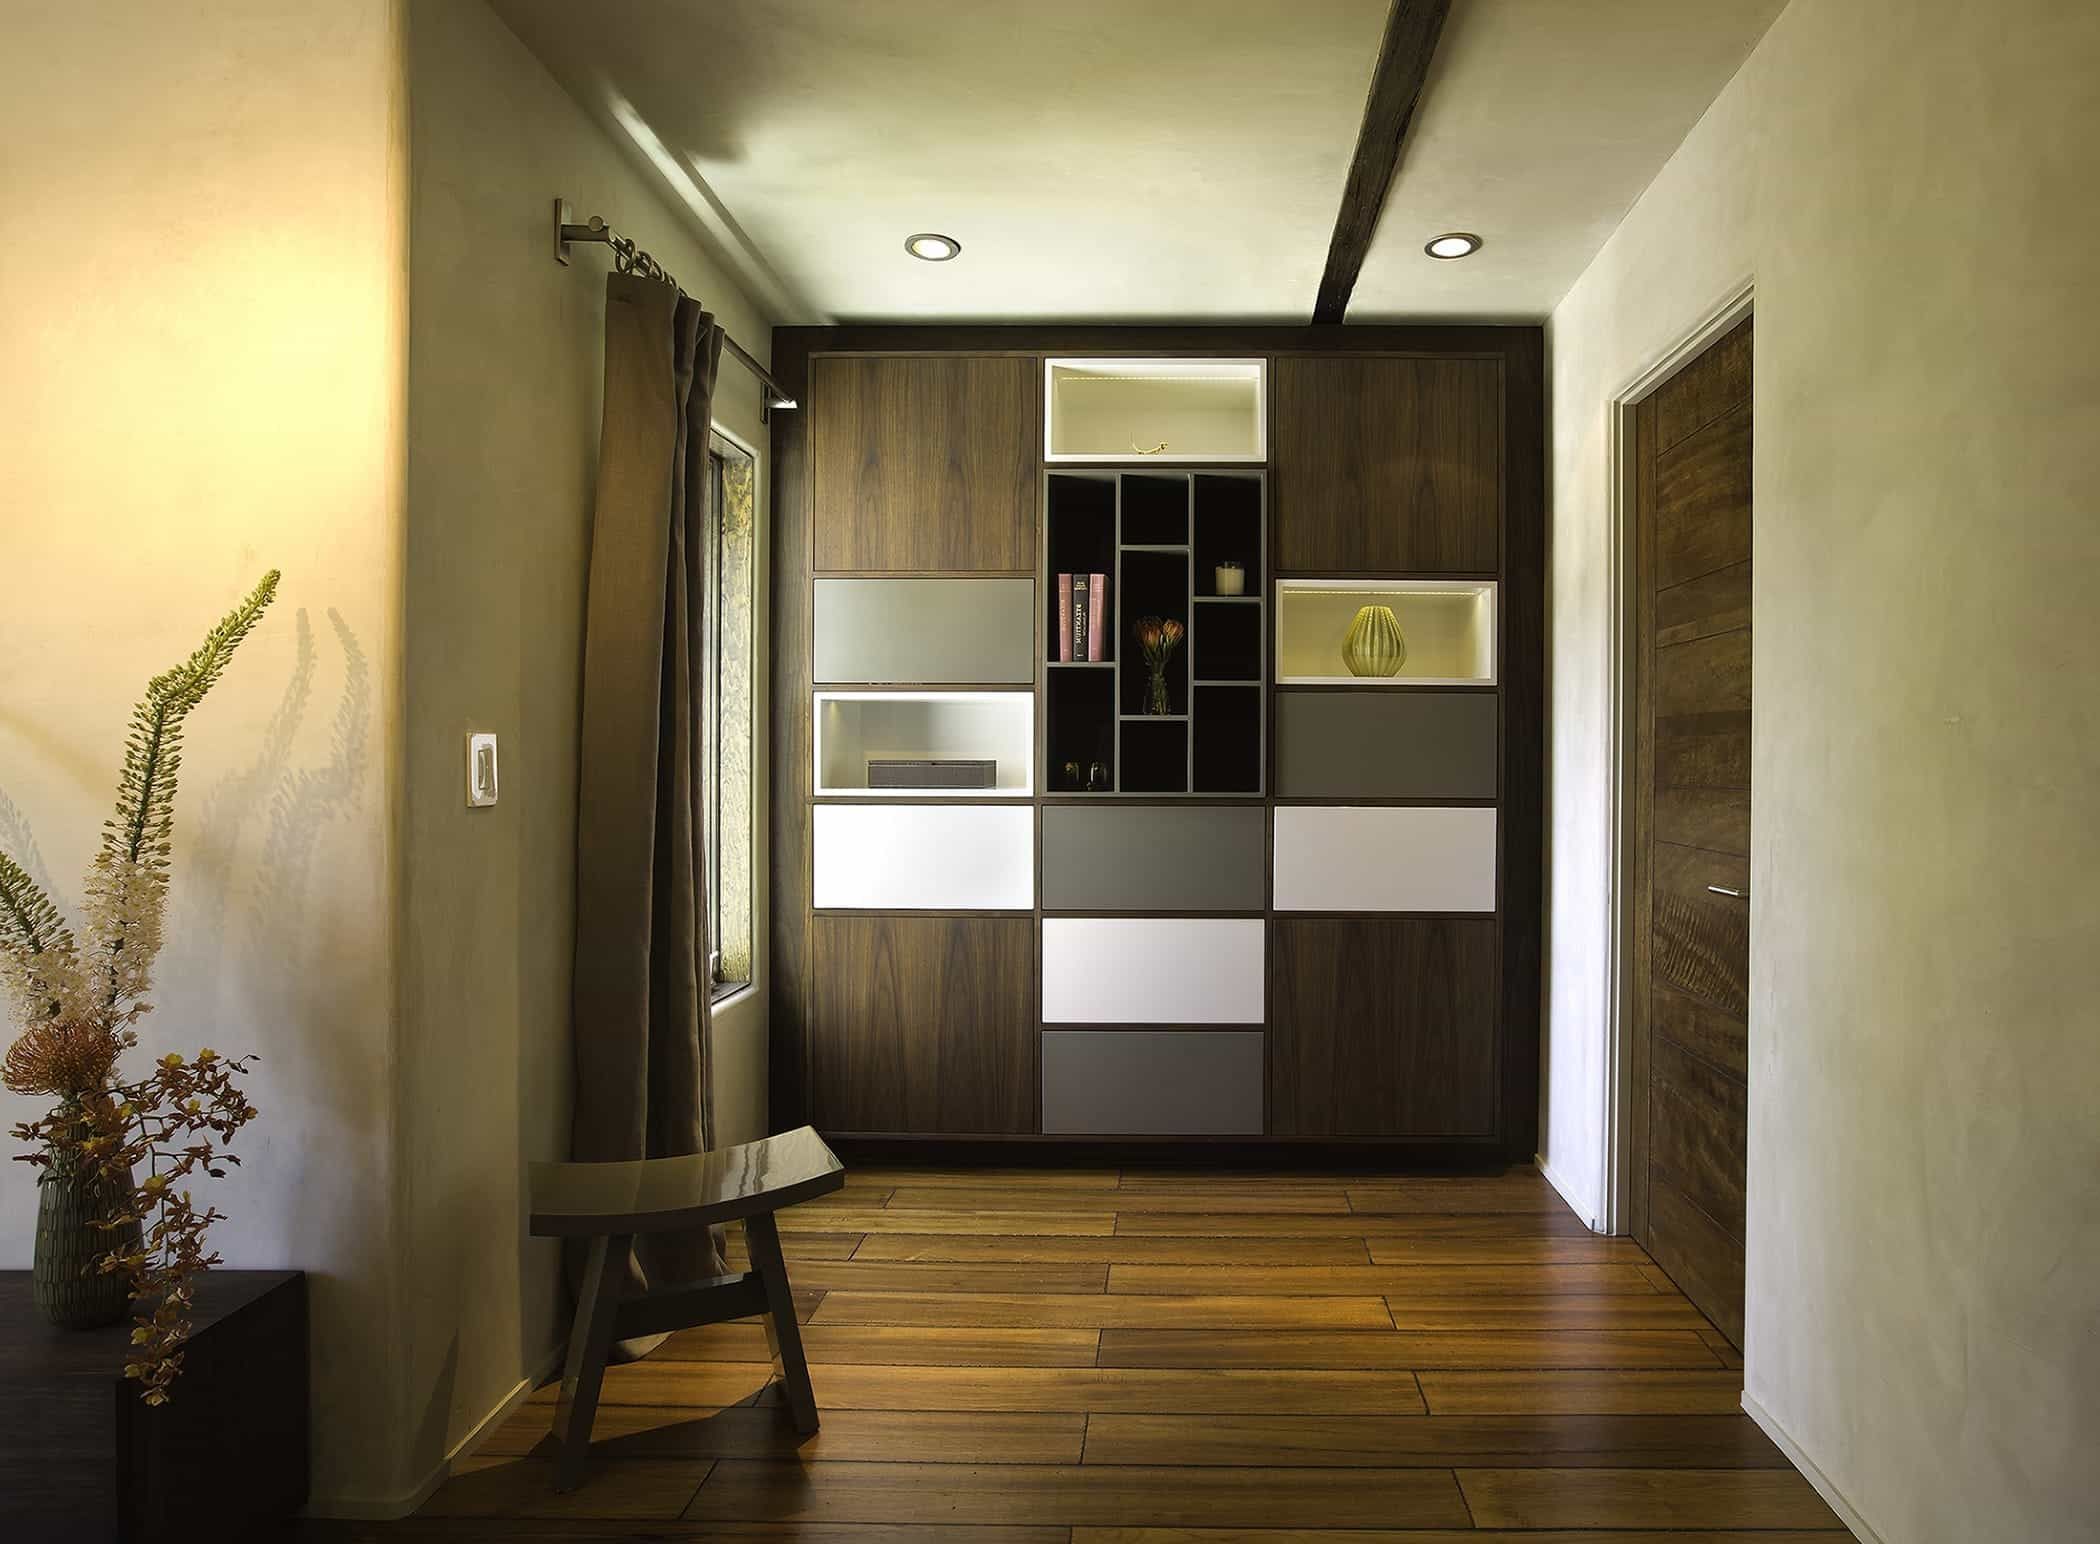 Contemporary Home Features A Custom Flat Storage Unit With A Wood Finish (View 10 of 10)